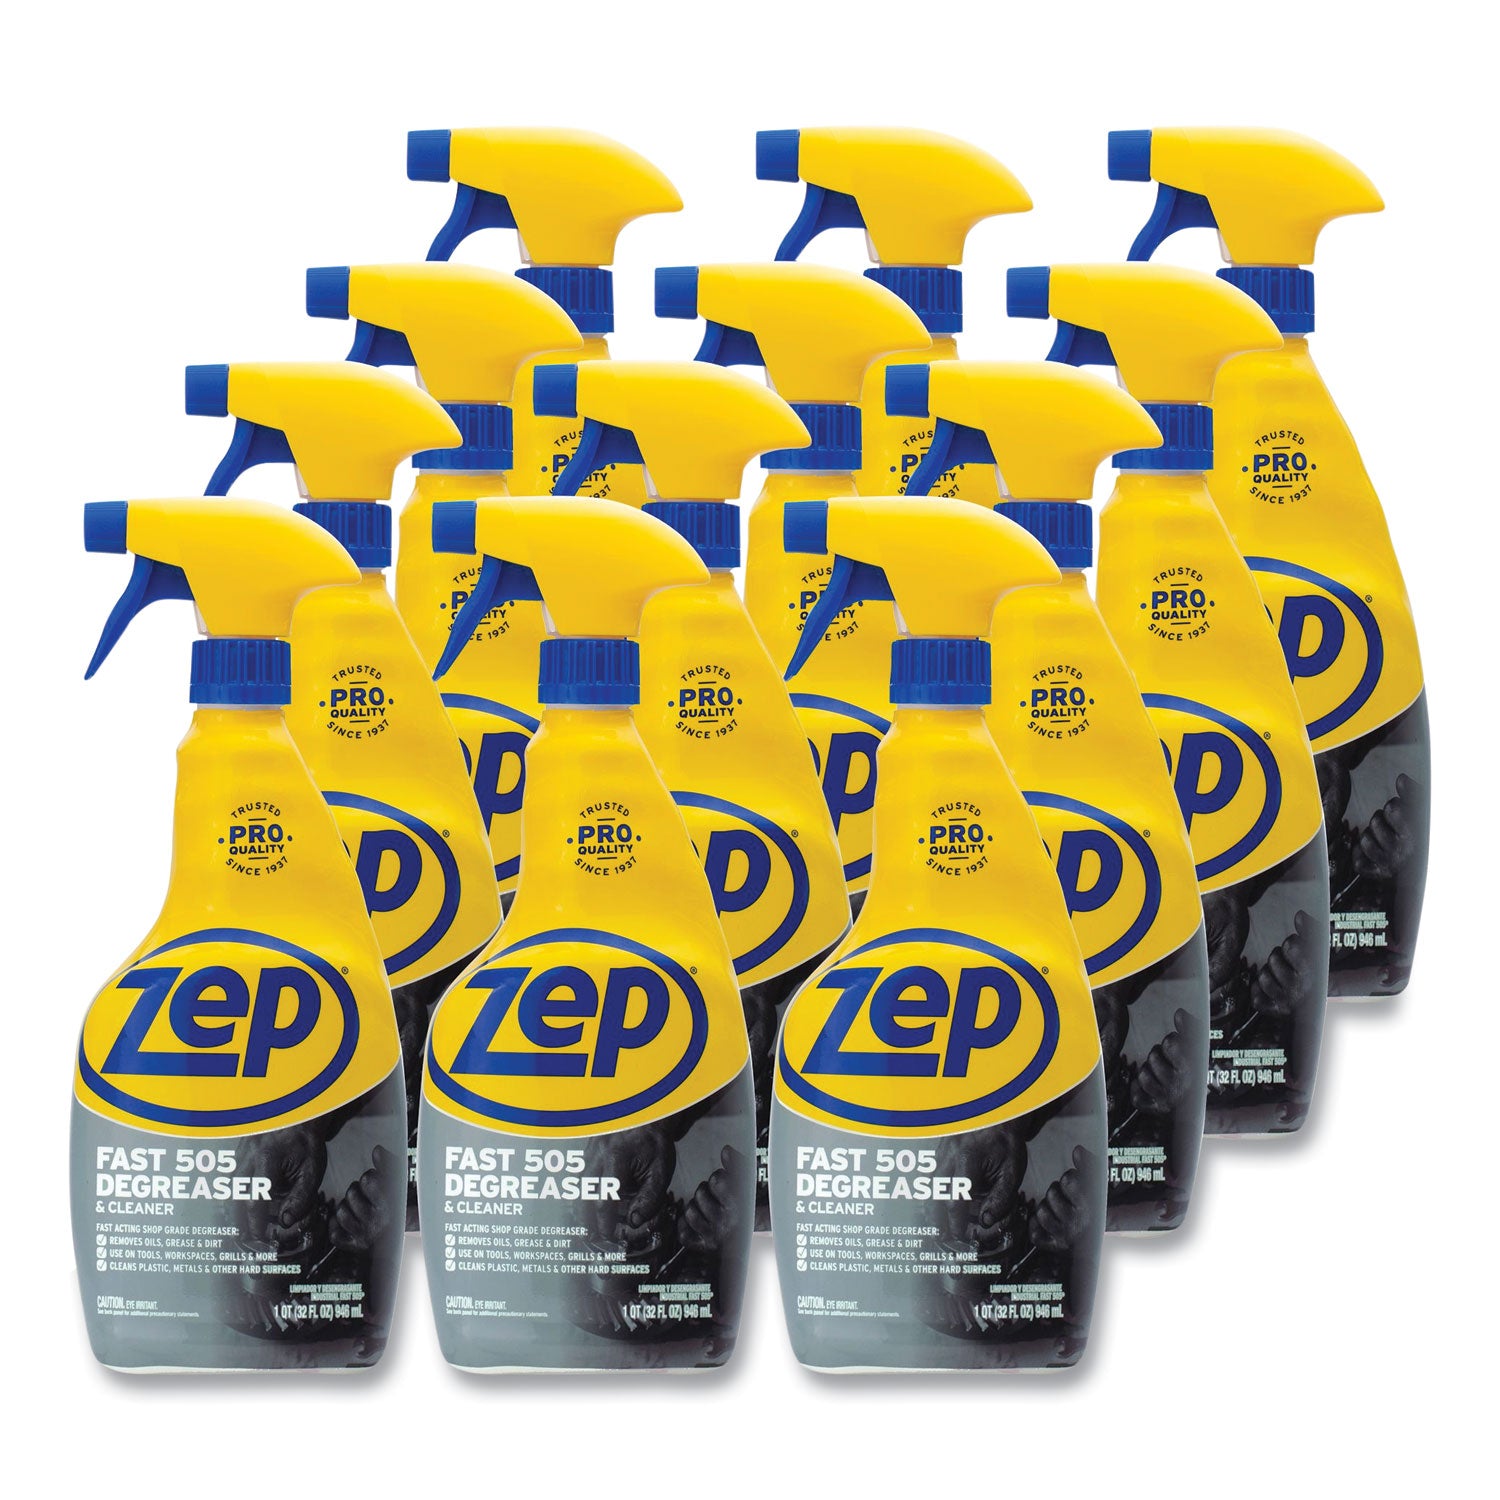 fast-505-cleaner-and-degreaser-32-oz-spray-bottle-12-carton_zpezu50532ct - 6